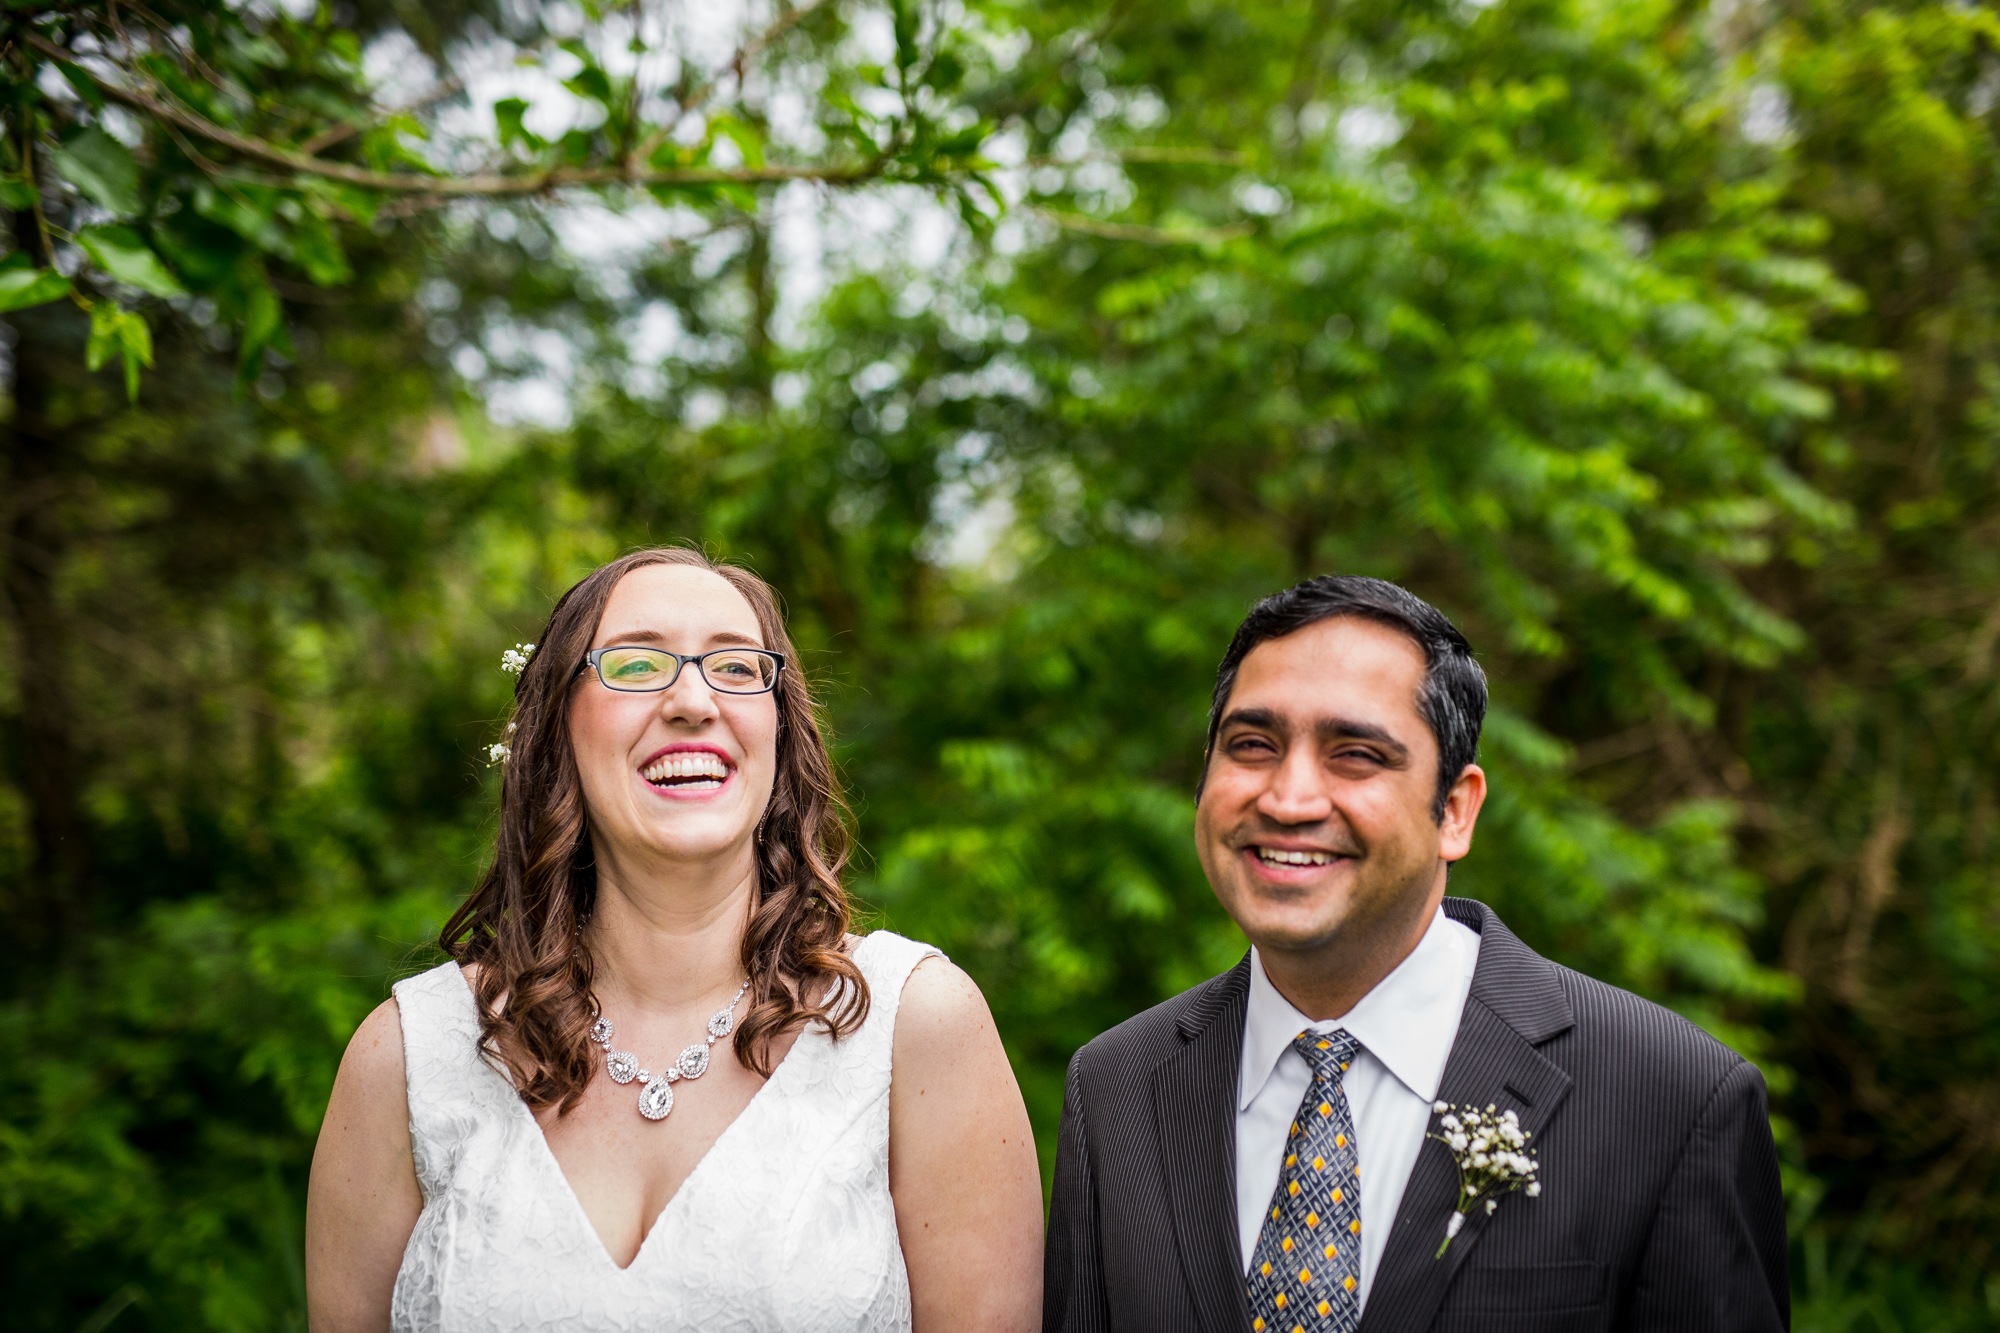 A bride and groom portrait at a backyard wedding in Yorkville, Illinois